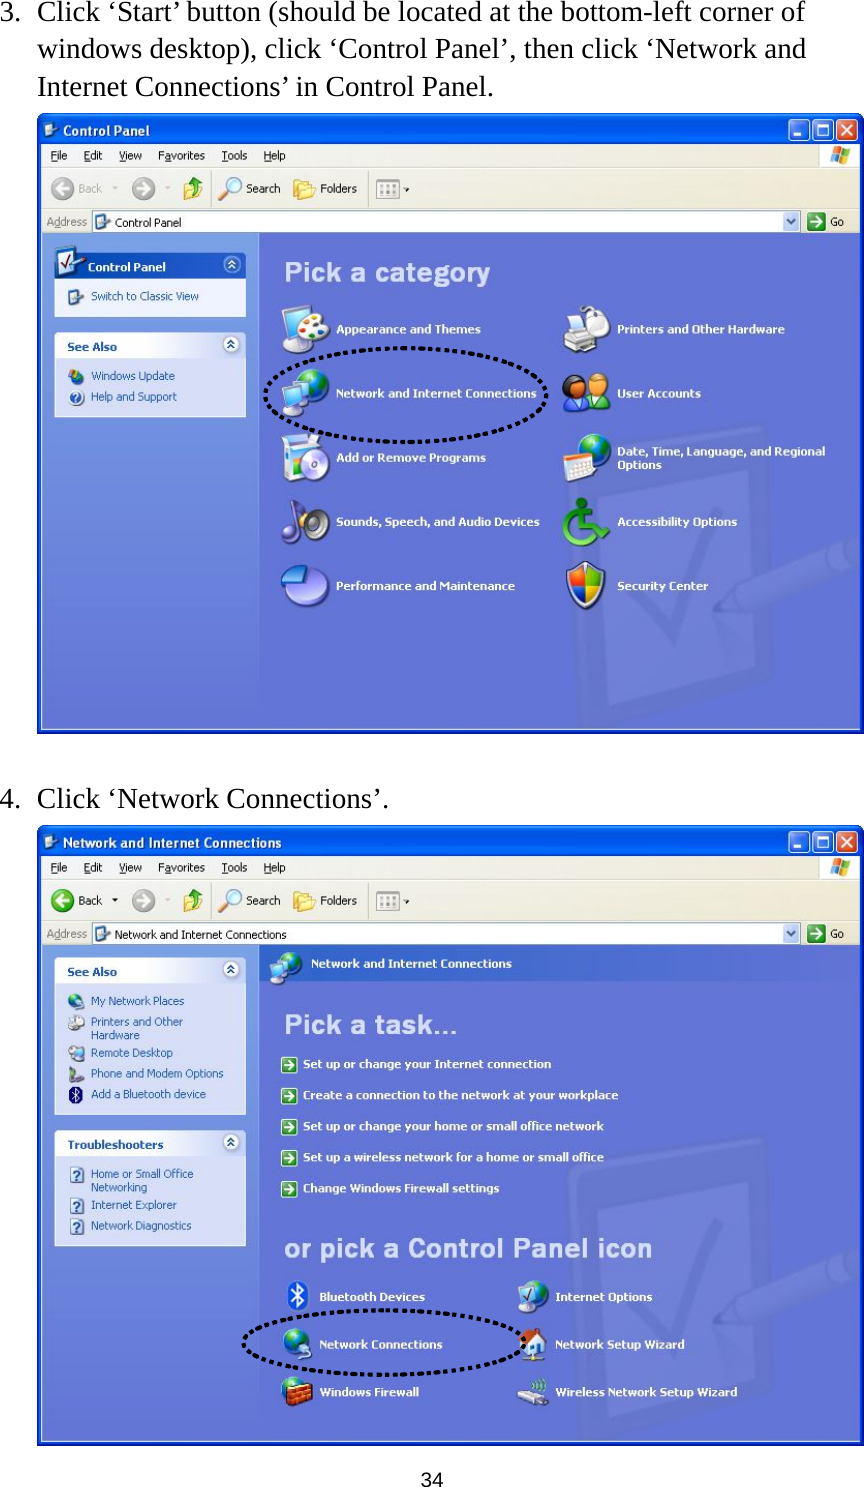  34 3. Click ‘Start’ button (should be located at the bottom-left corner of windows desktop), click ‘Control Panel’, then click ‘Network and Internet Connections’ in Control Panel.   4. Click ‘Network Connections’.  